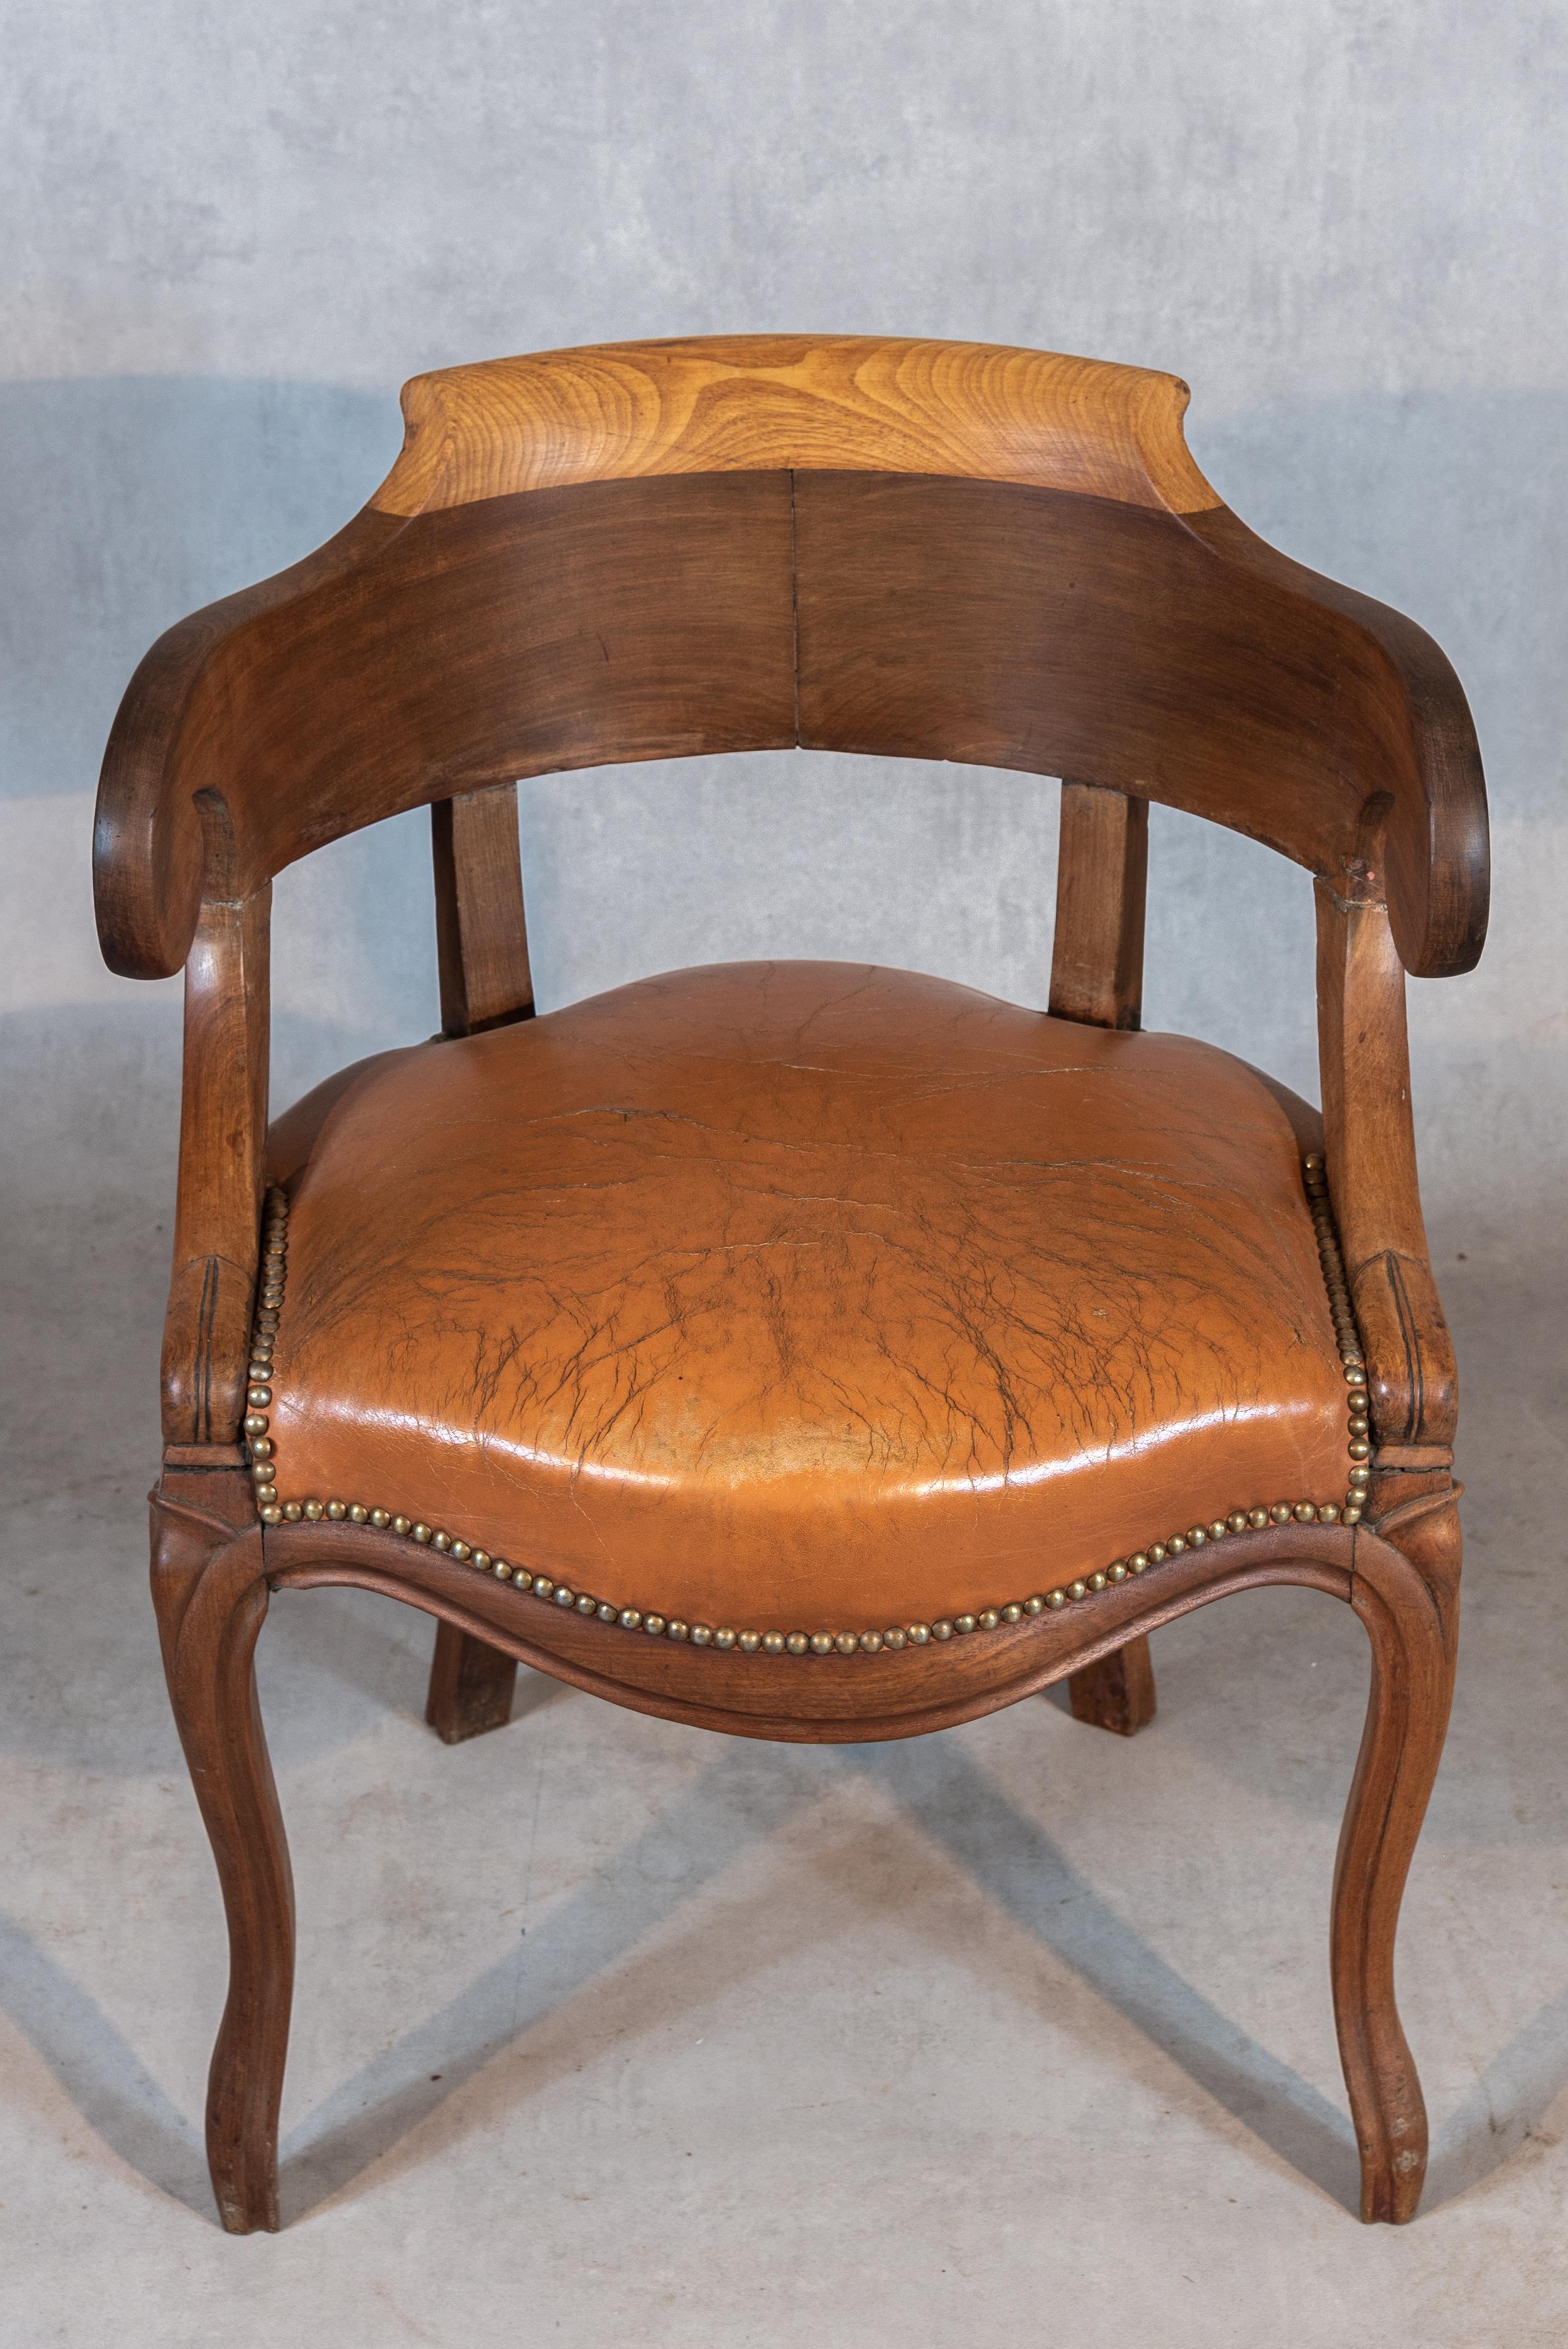 Indulge in the timeless elegance of the 19th century with this exquisite French Mahogany Louis Philippe Period Desk Chair. Crafted with meticulous attention to detail, this chair embodies the sophistication and charm of the Louis Philippe